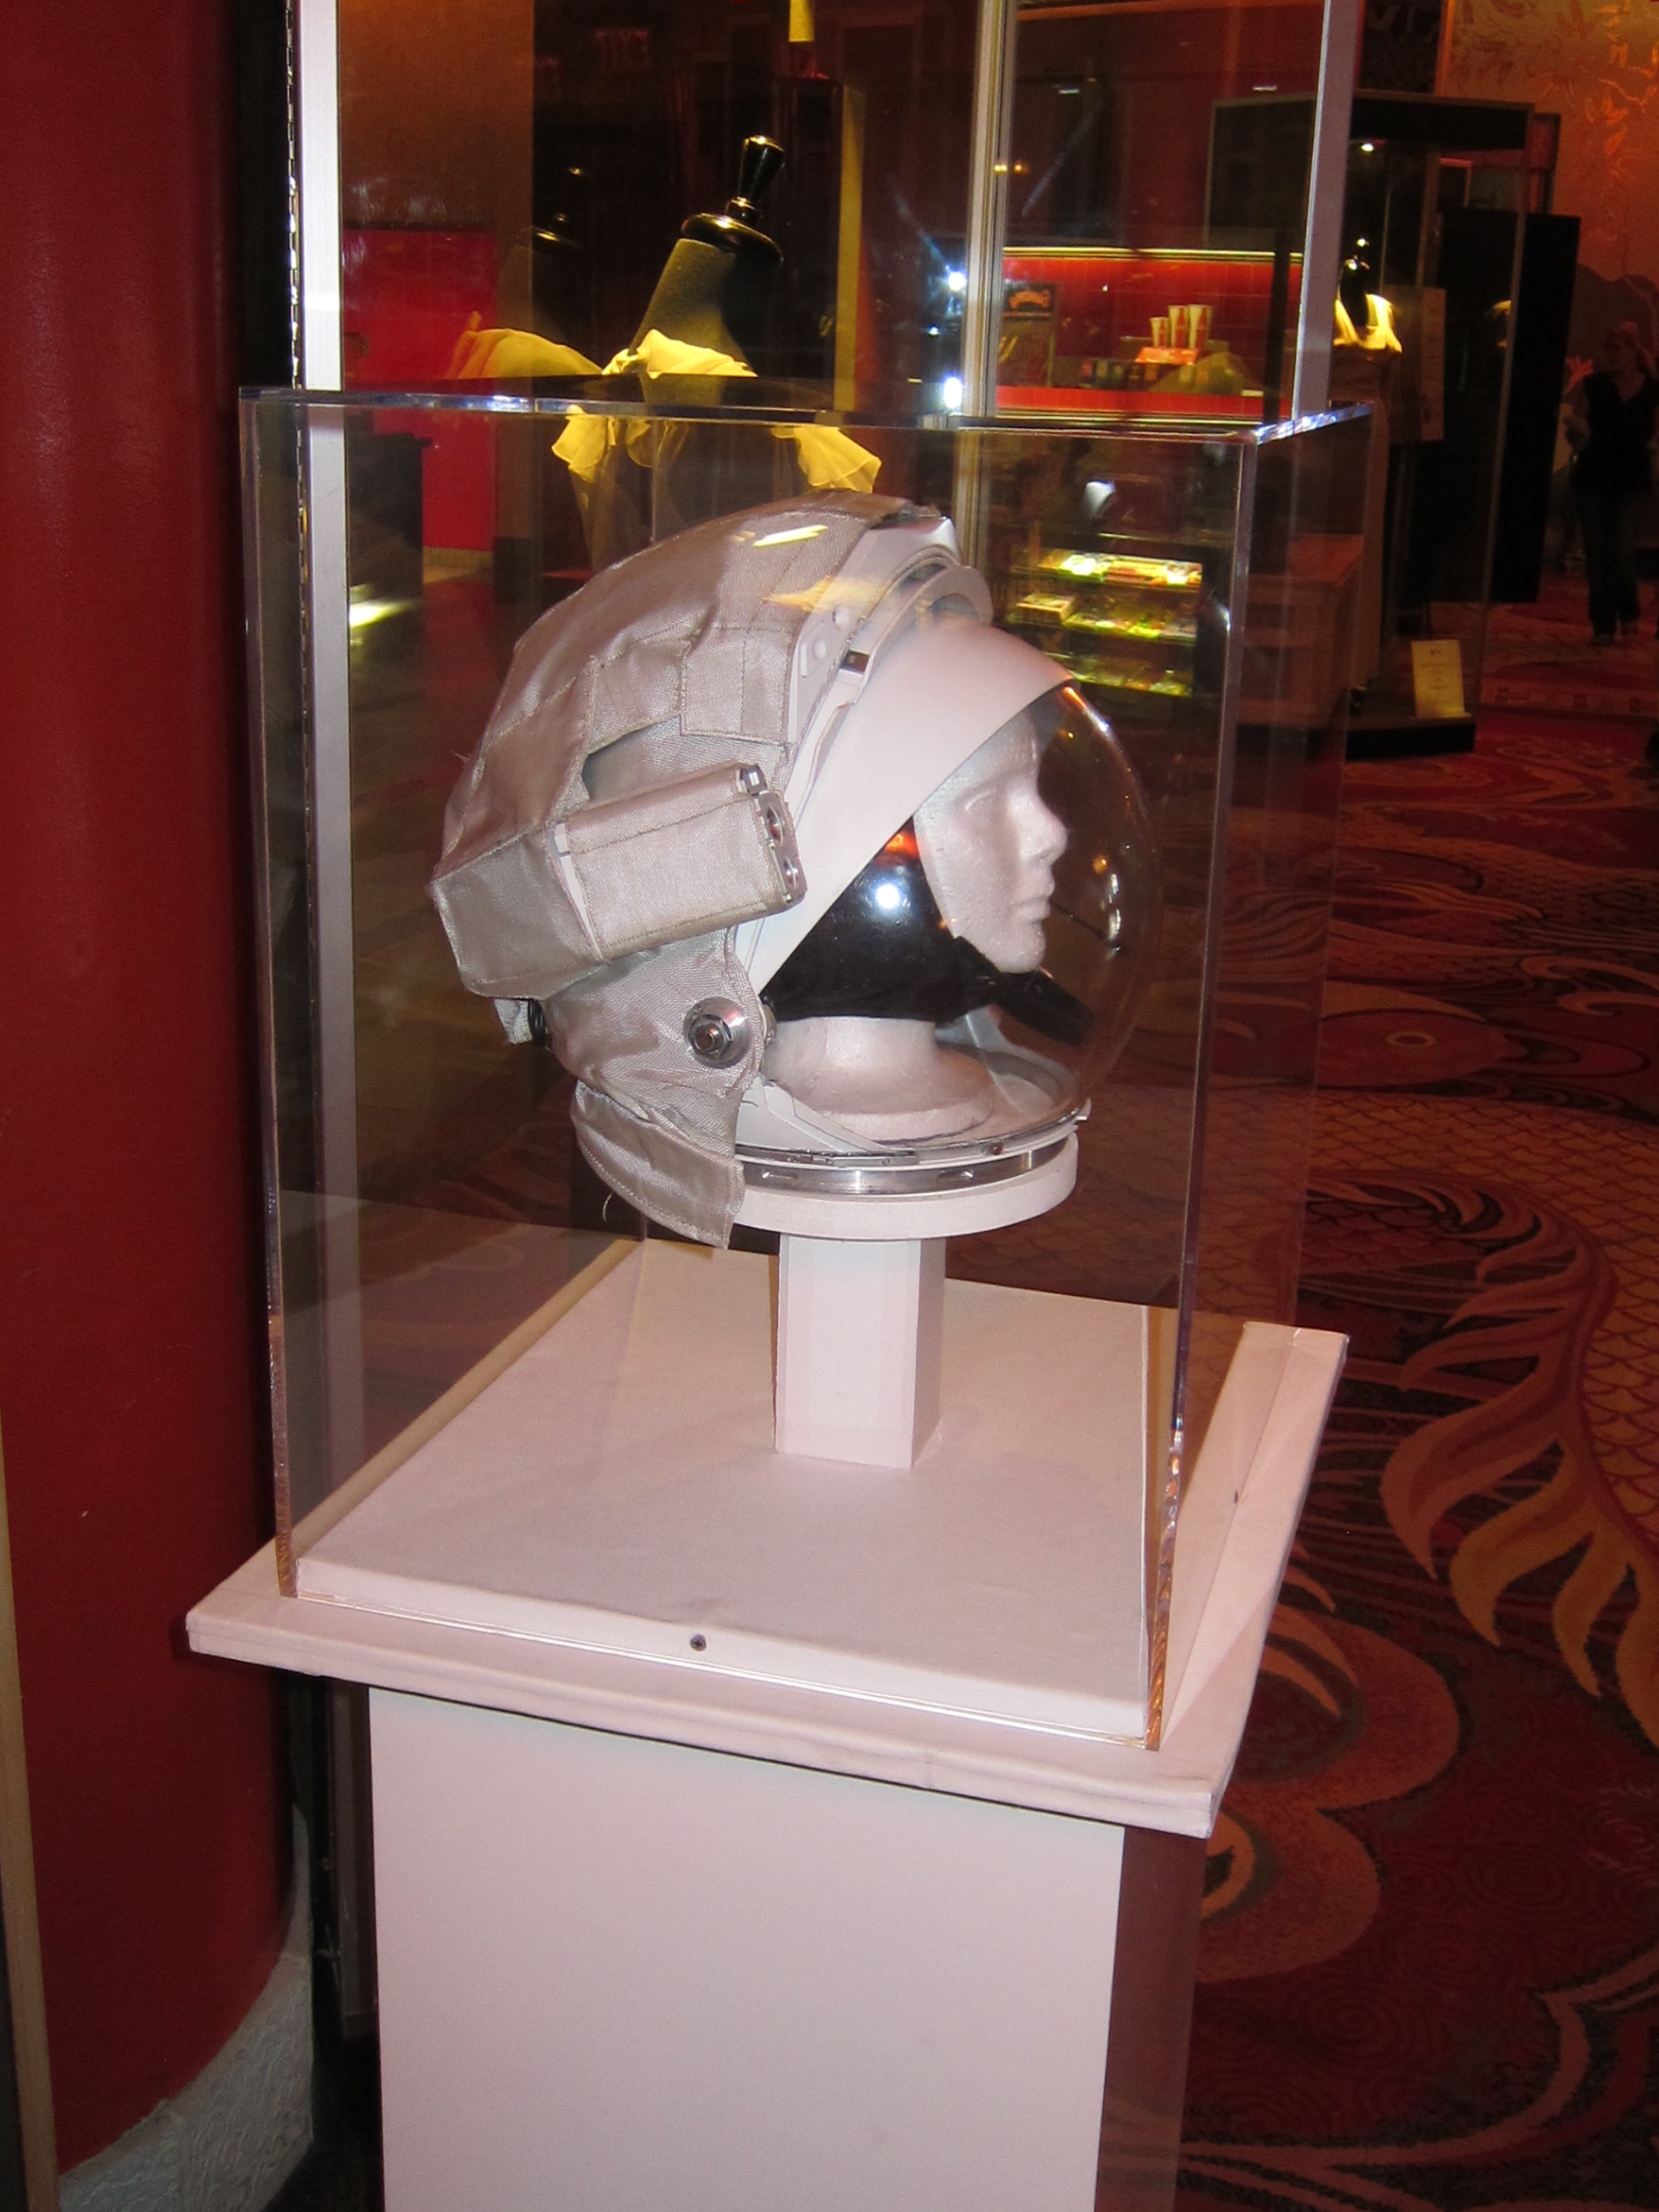 A space helmet worn by Sandra Bullock in the making of GRAVITY.